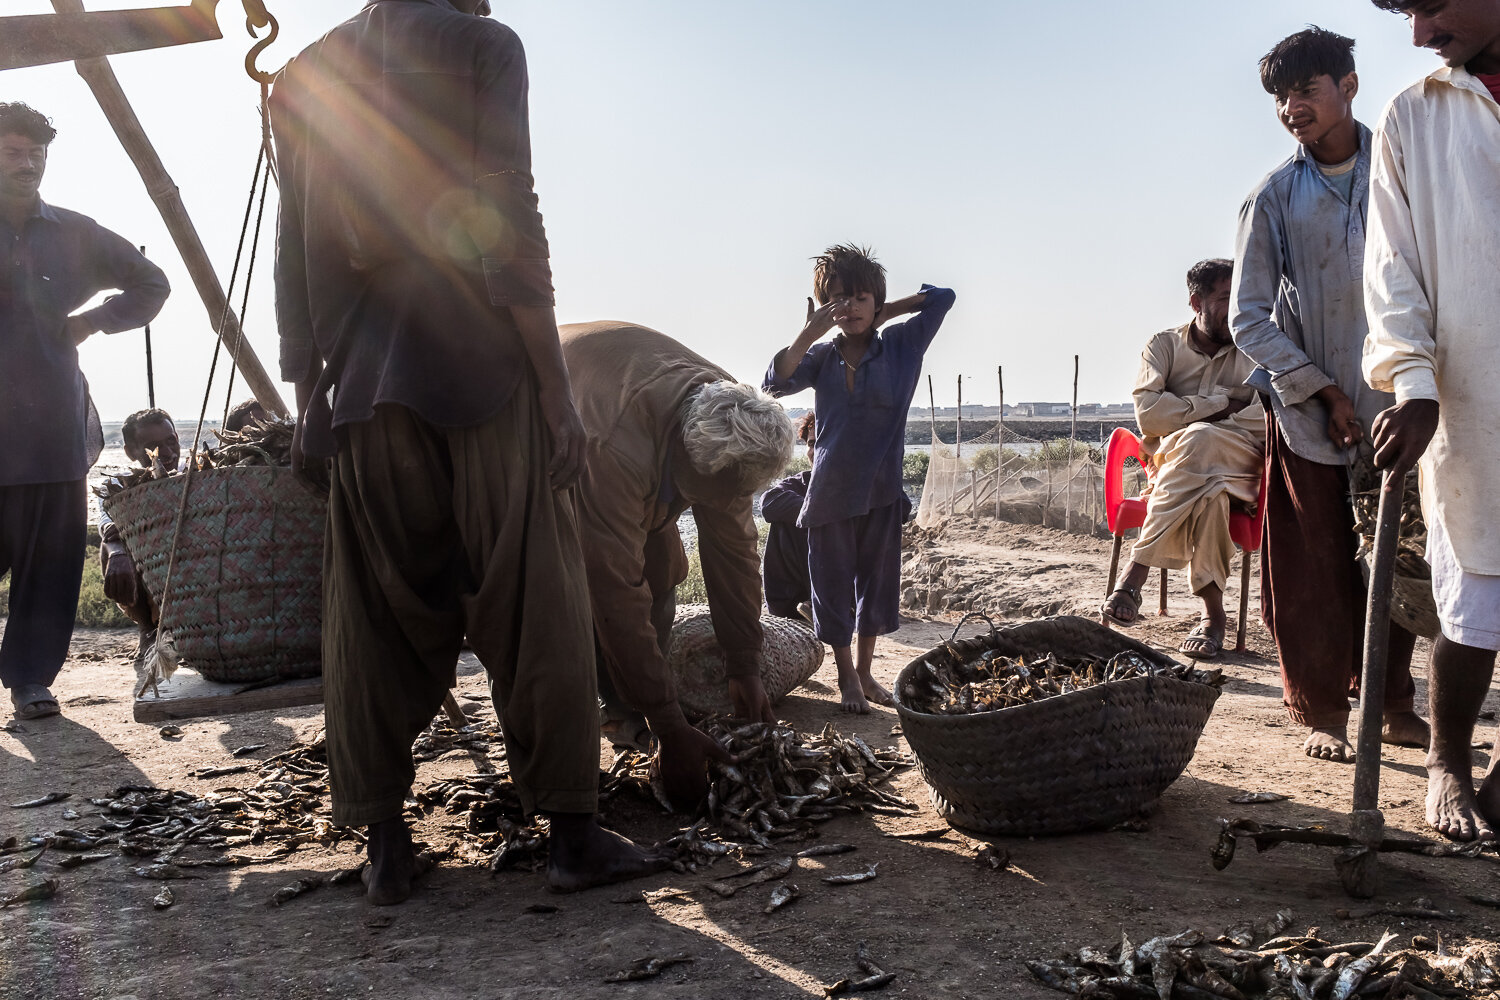  Fishermen weigh dried fish on Friday, December 1, 2017 in Keti Bandar, Sindh, Pakistan. At the very tip of the Indus River delta, fishing is no longer as lucrative as it once was, due to reduced river flows and fewer fish. As a result, fishermen are